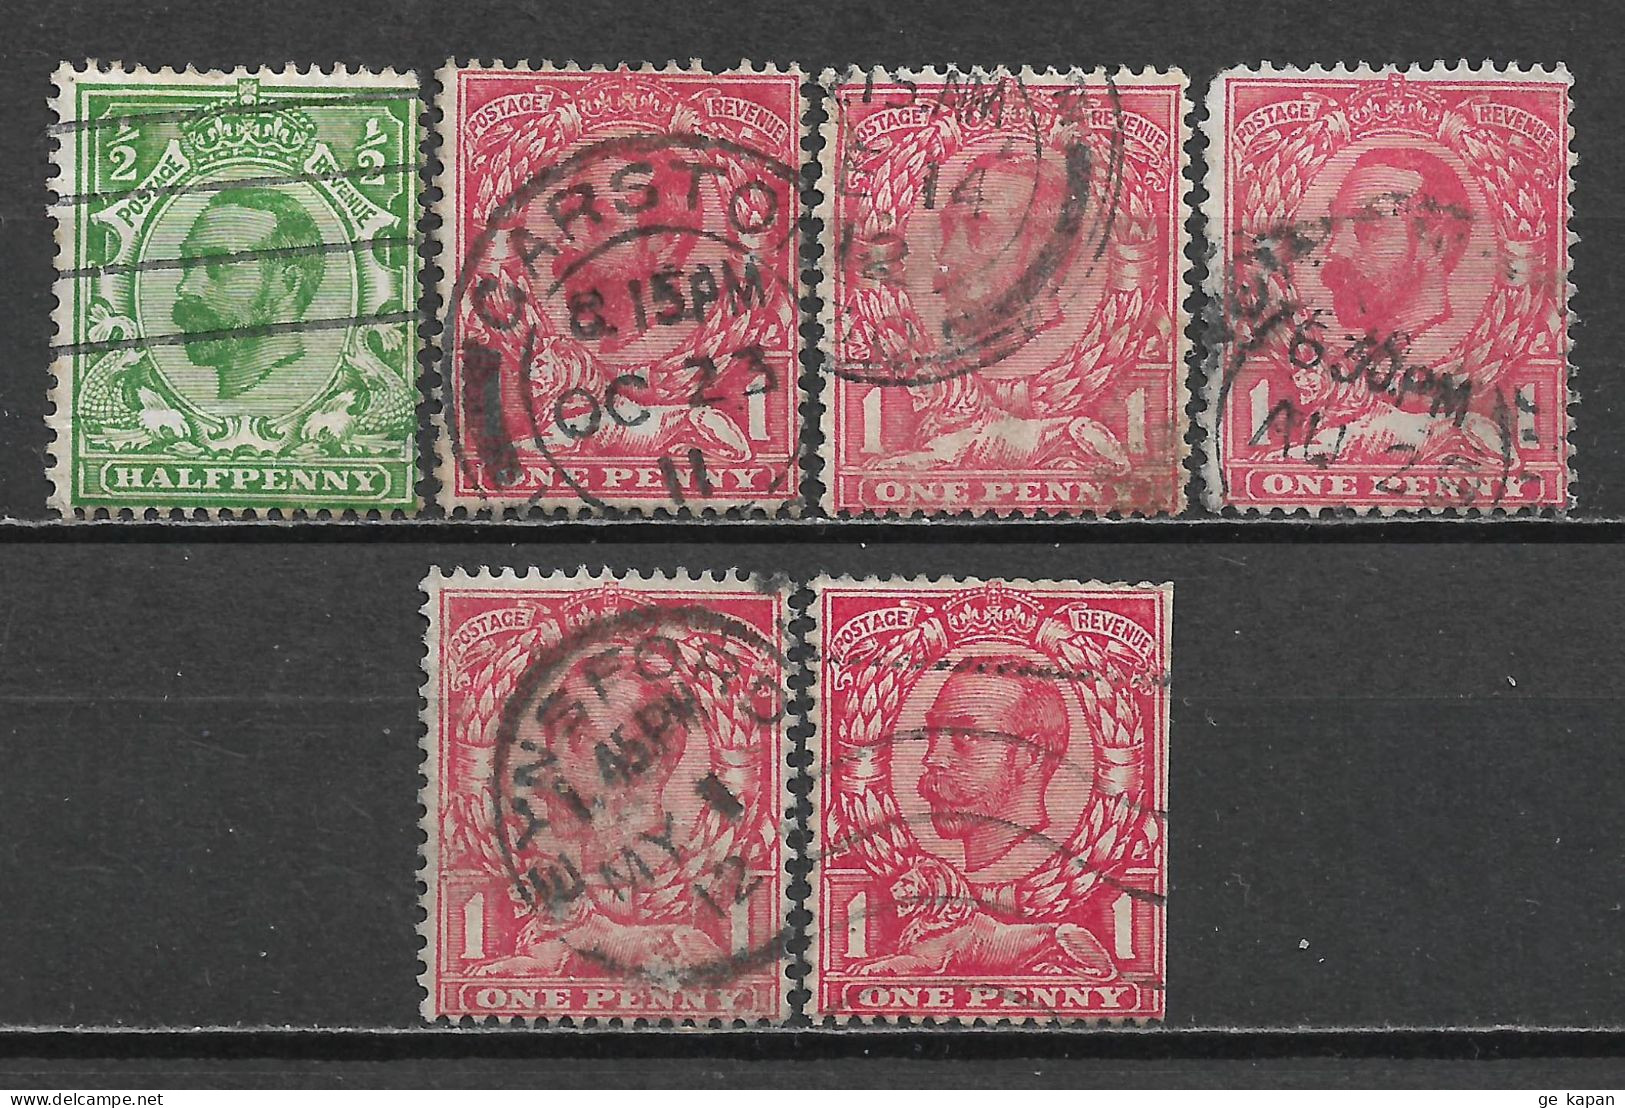 1911,1912 GREAT BRITAIN Set Of 6 Used Stamps (Scott # 151,152,154) CV $20.50 - Used Stamps